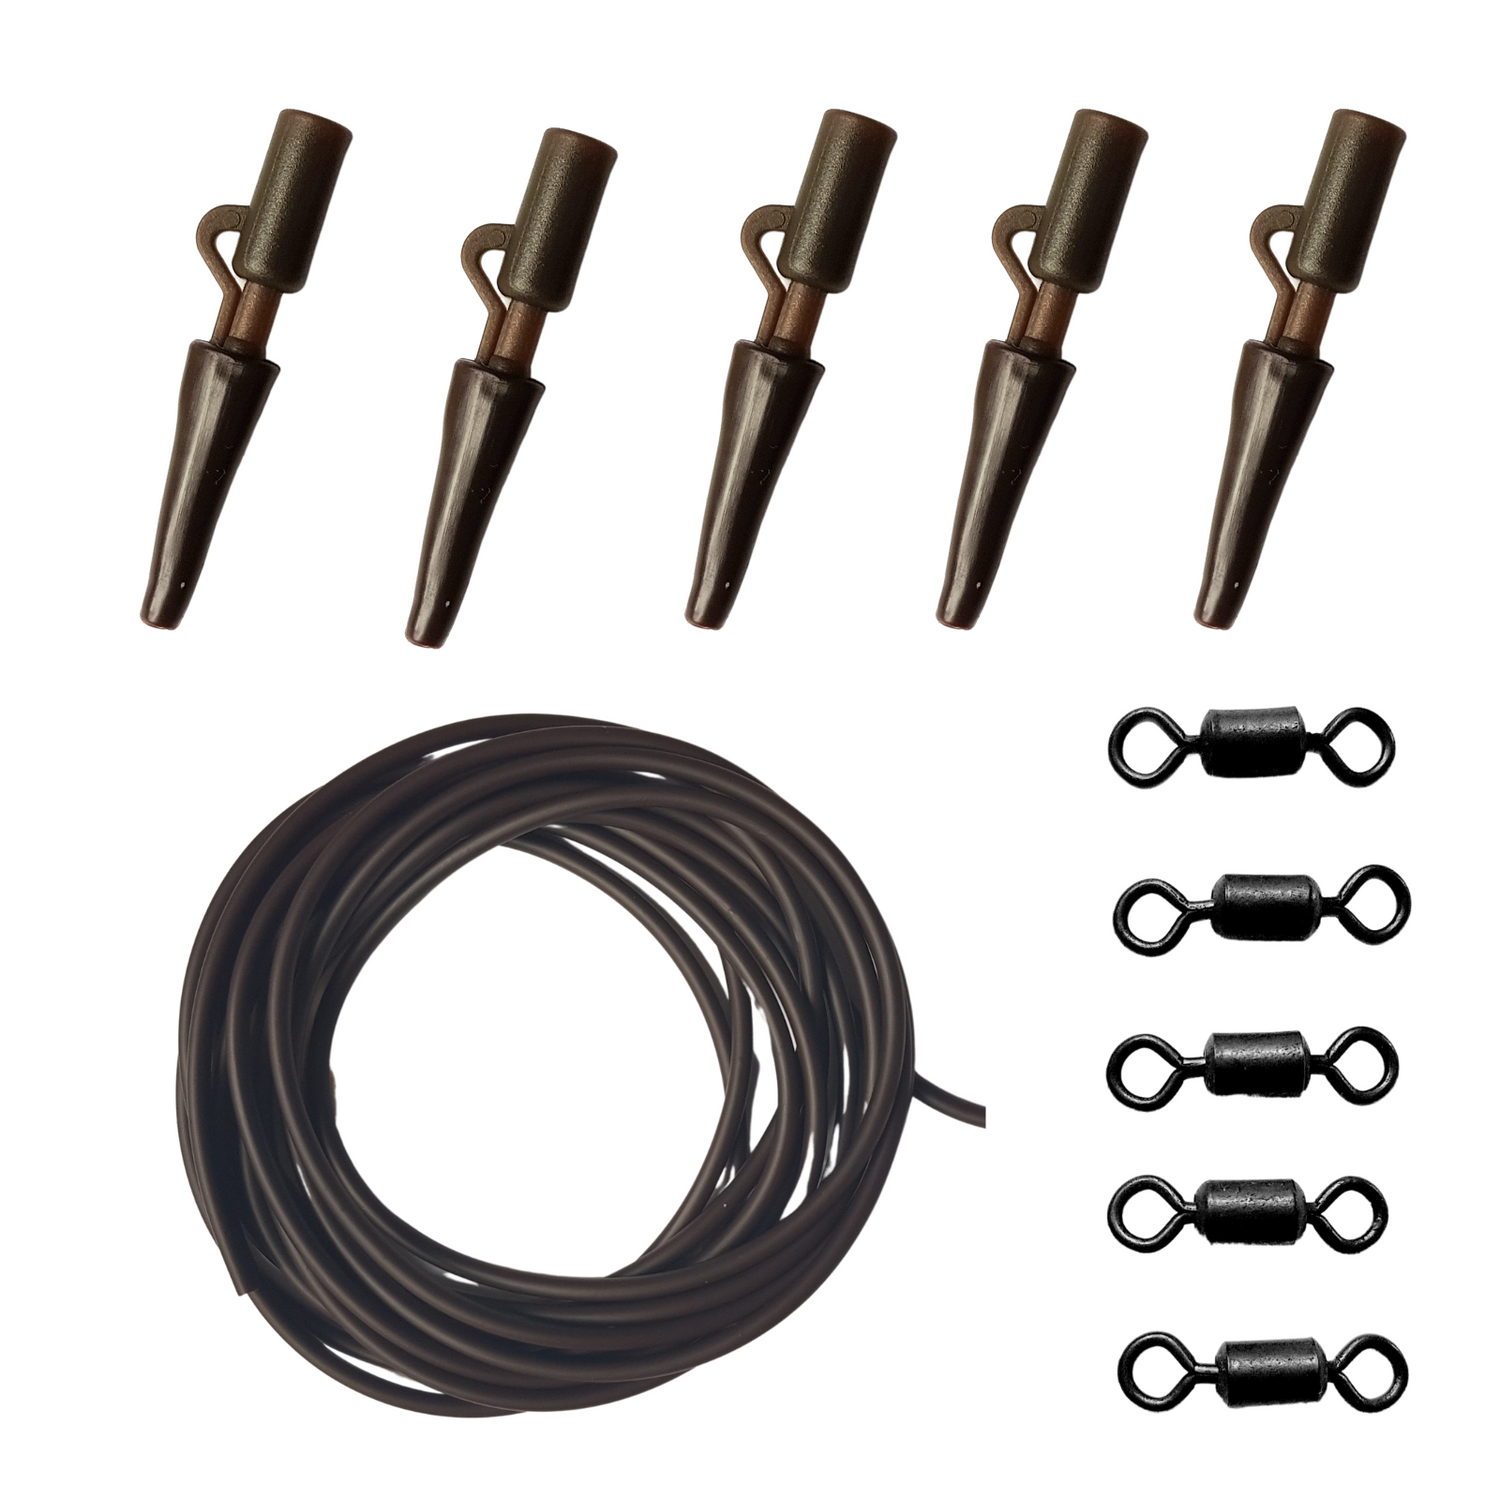 41 Piece Fishing Brown Lead Clip Action Pack Inc Clips, Swivels, Tail Rubbers 6mm Beads & Tubing